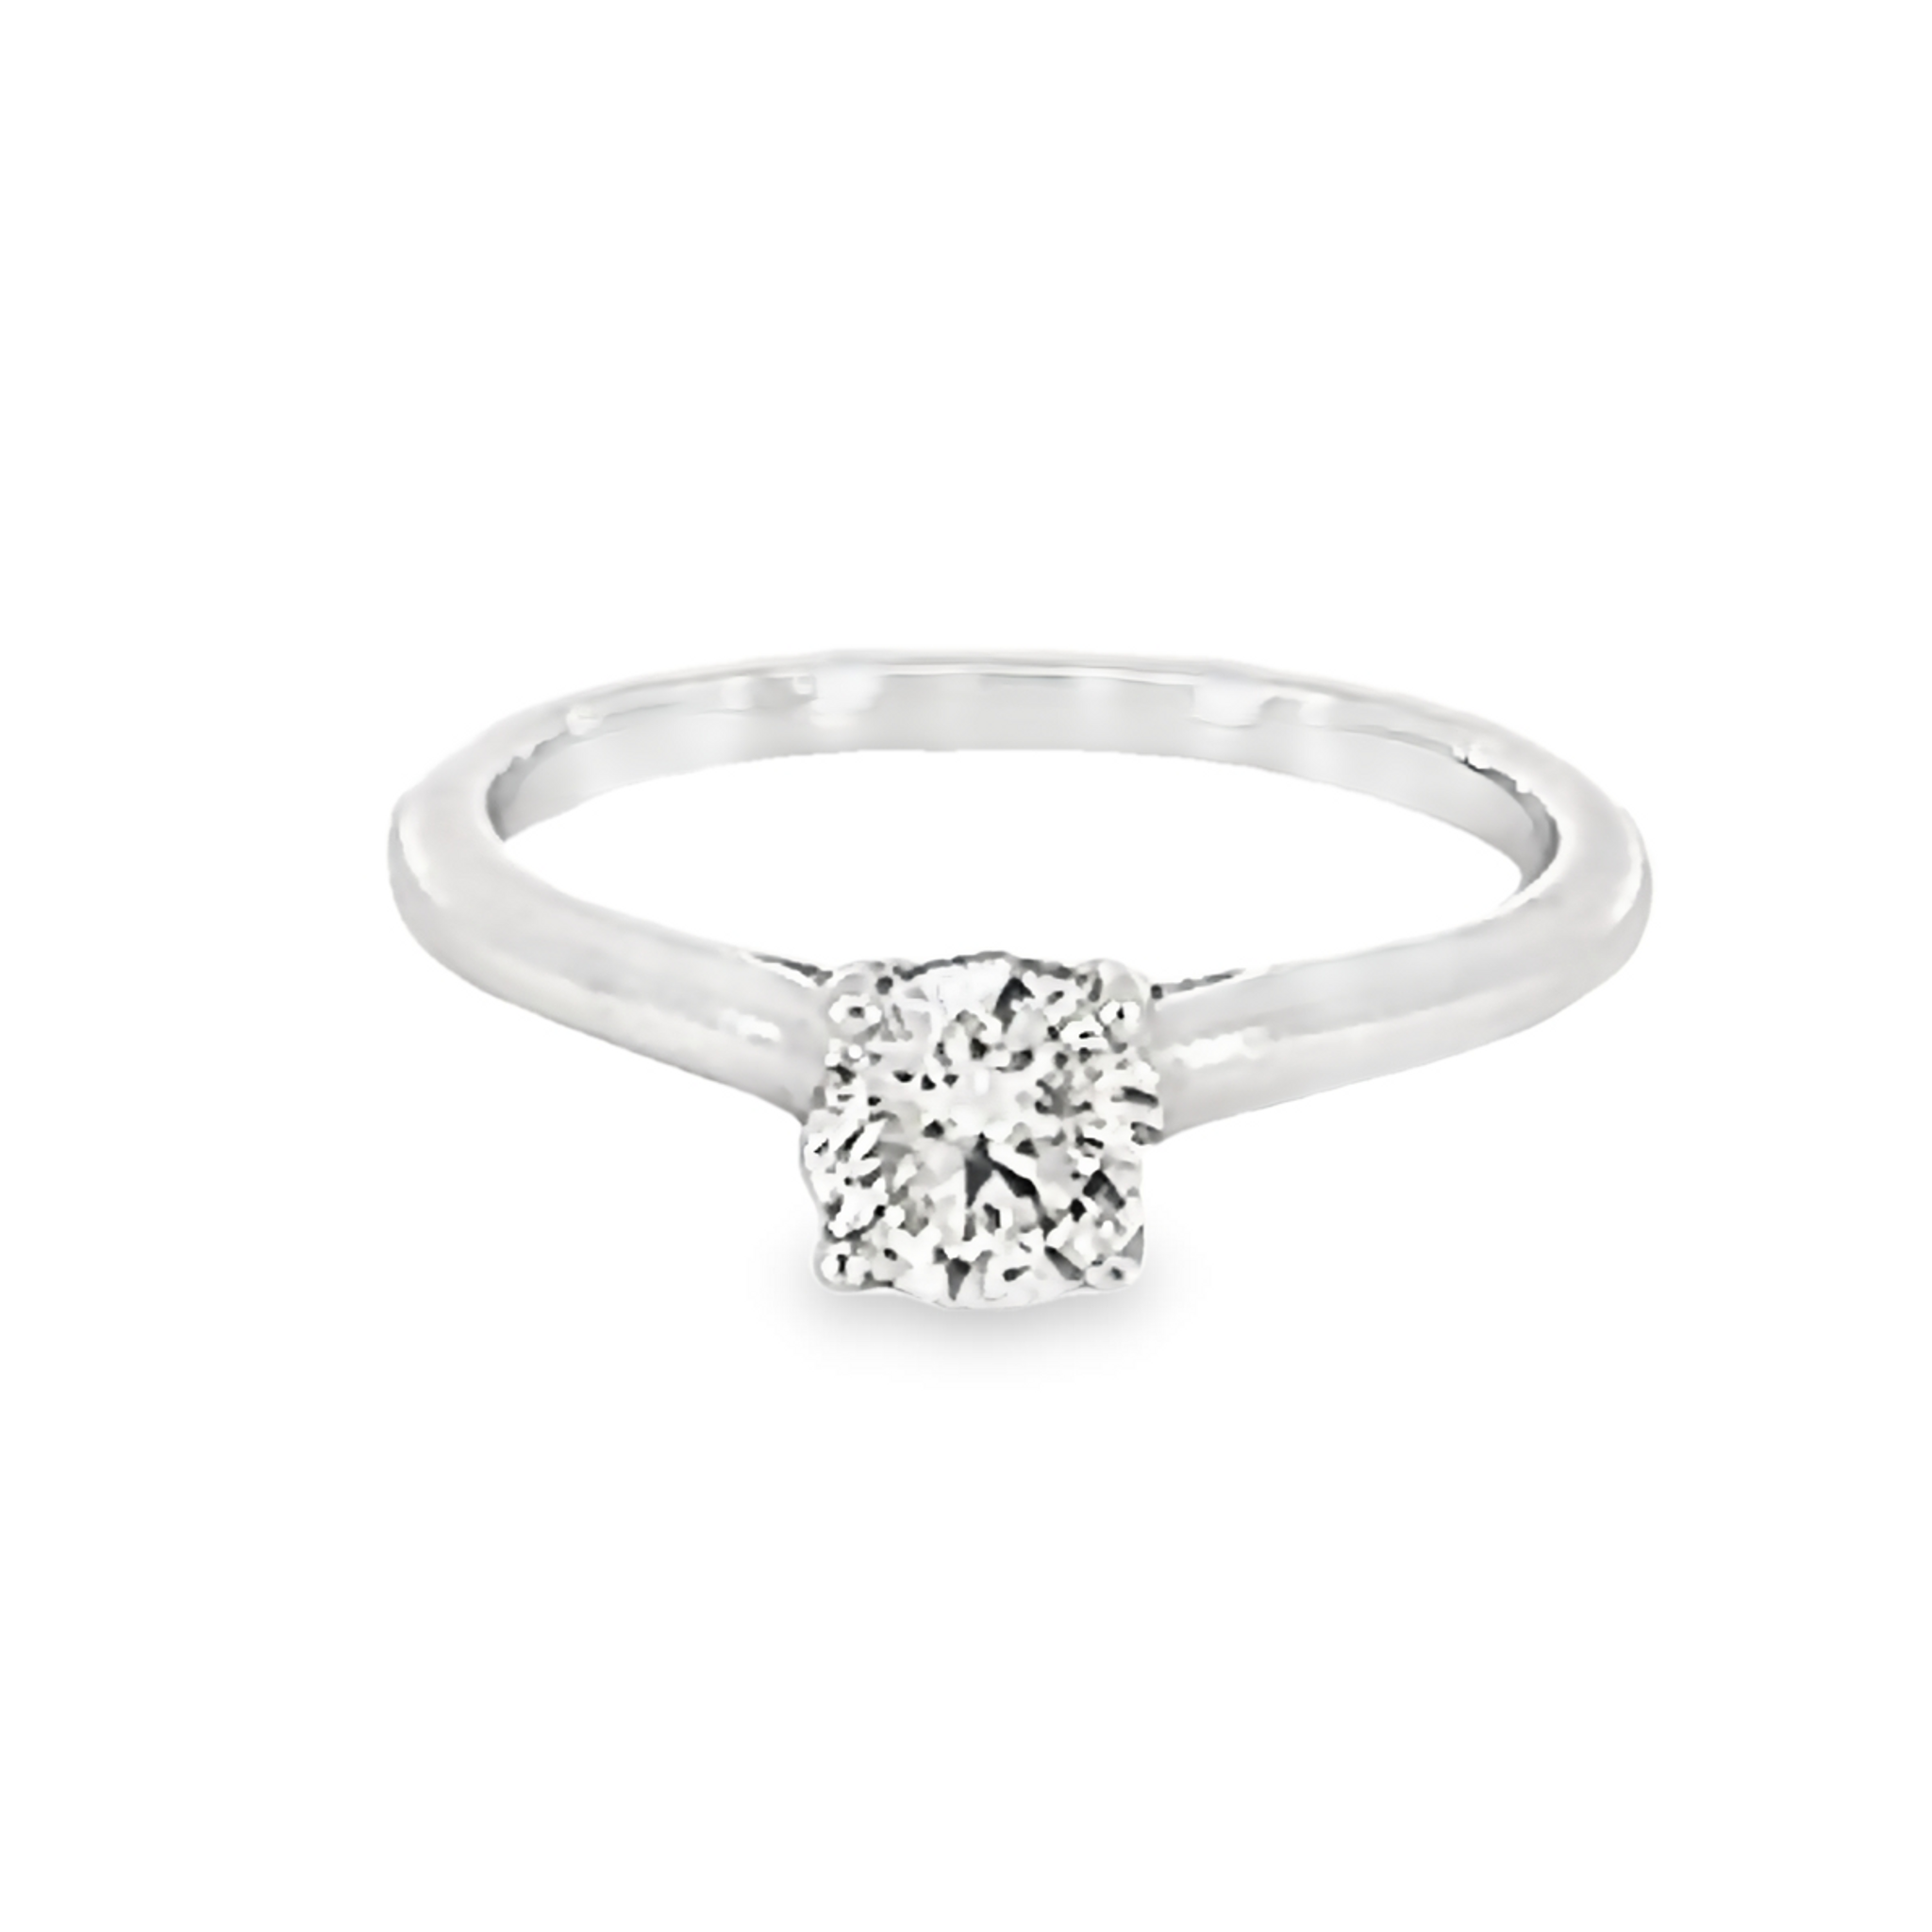 14 Karat white gold engagement ring with One 0.71Ct Round Brilliant J I1 Diamond And 26=0.06 total weight Round Brilliant G SI Diamonds. Size 7